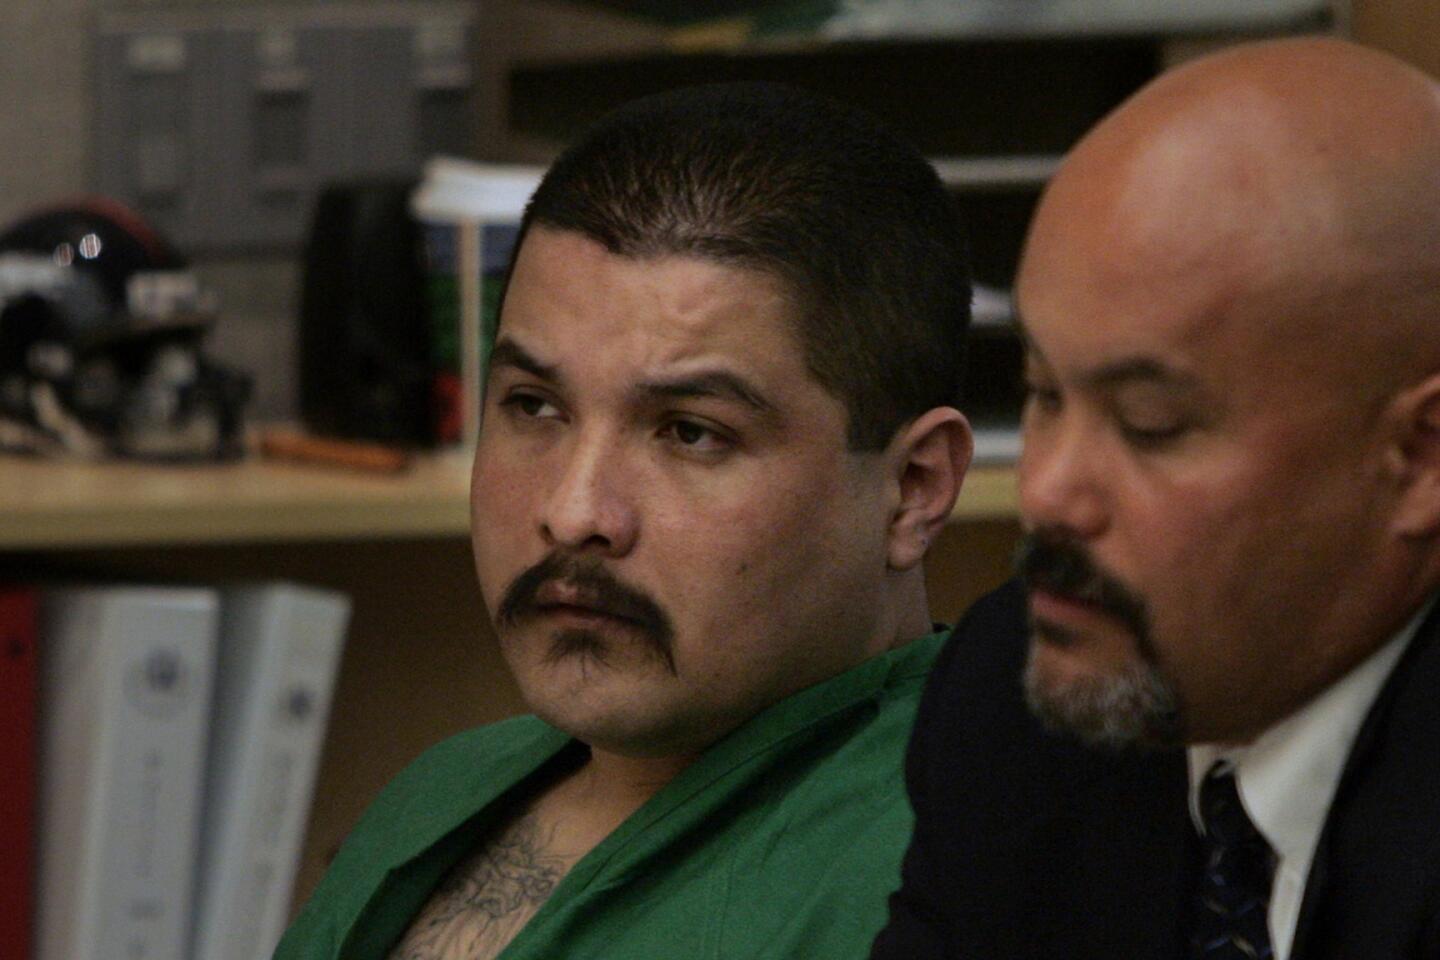 February 7, 2006 file photo of Adrian Camacho, left, with lawyer William Stone, as they listen to Judge Joan Weber read the death sentence in a Vista courtroom. Camacho, 43, shot and killed Oceanside police Officer Tony Zeppetella during a traffic stop in June 2003.